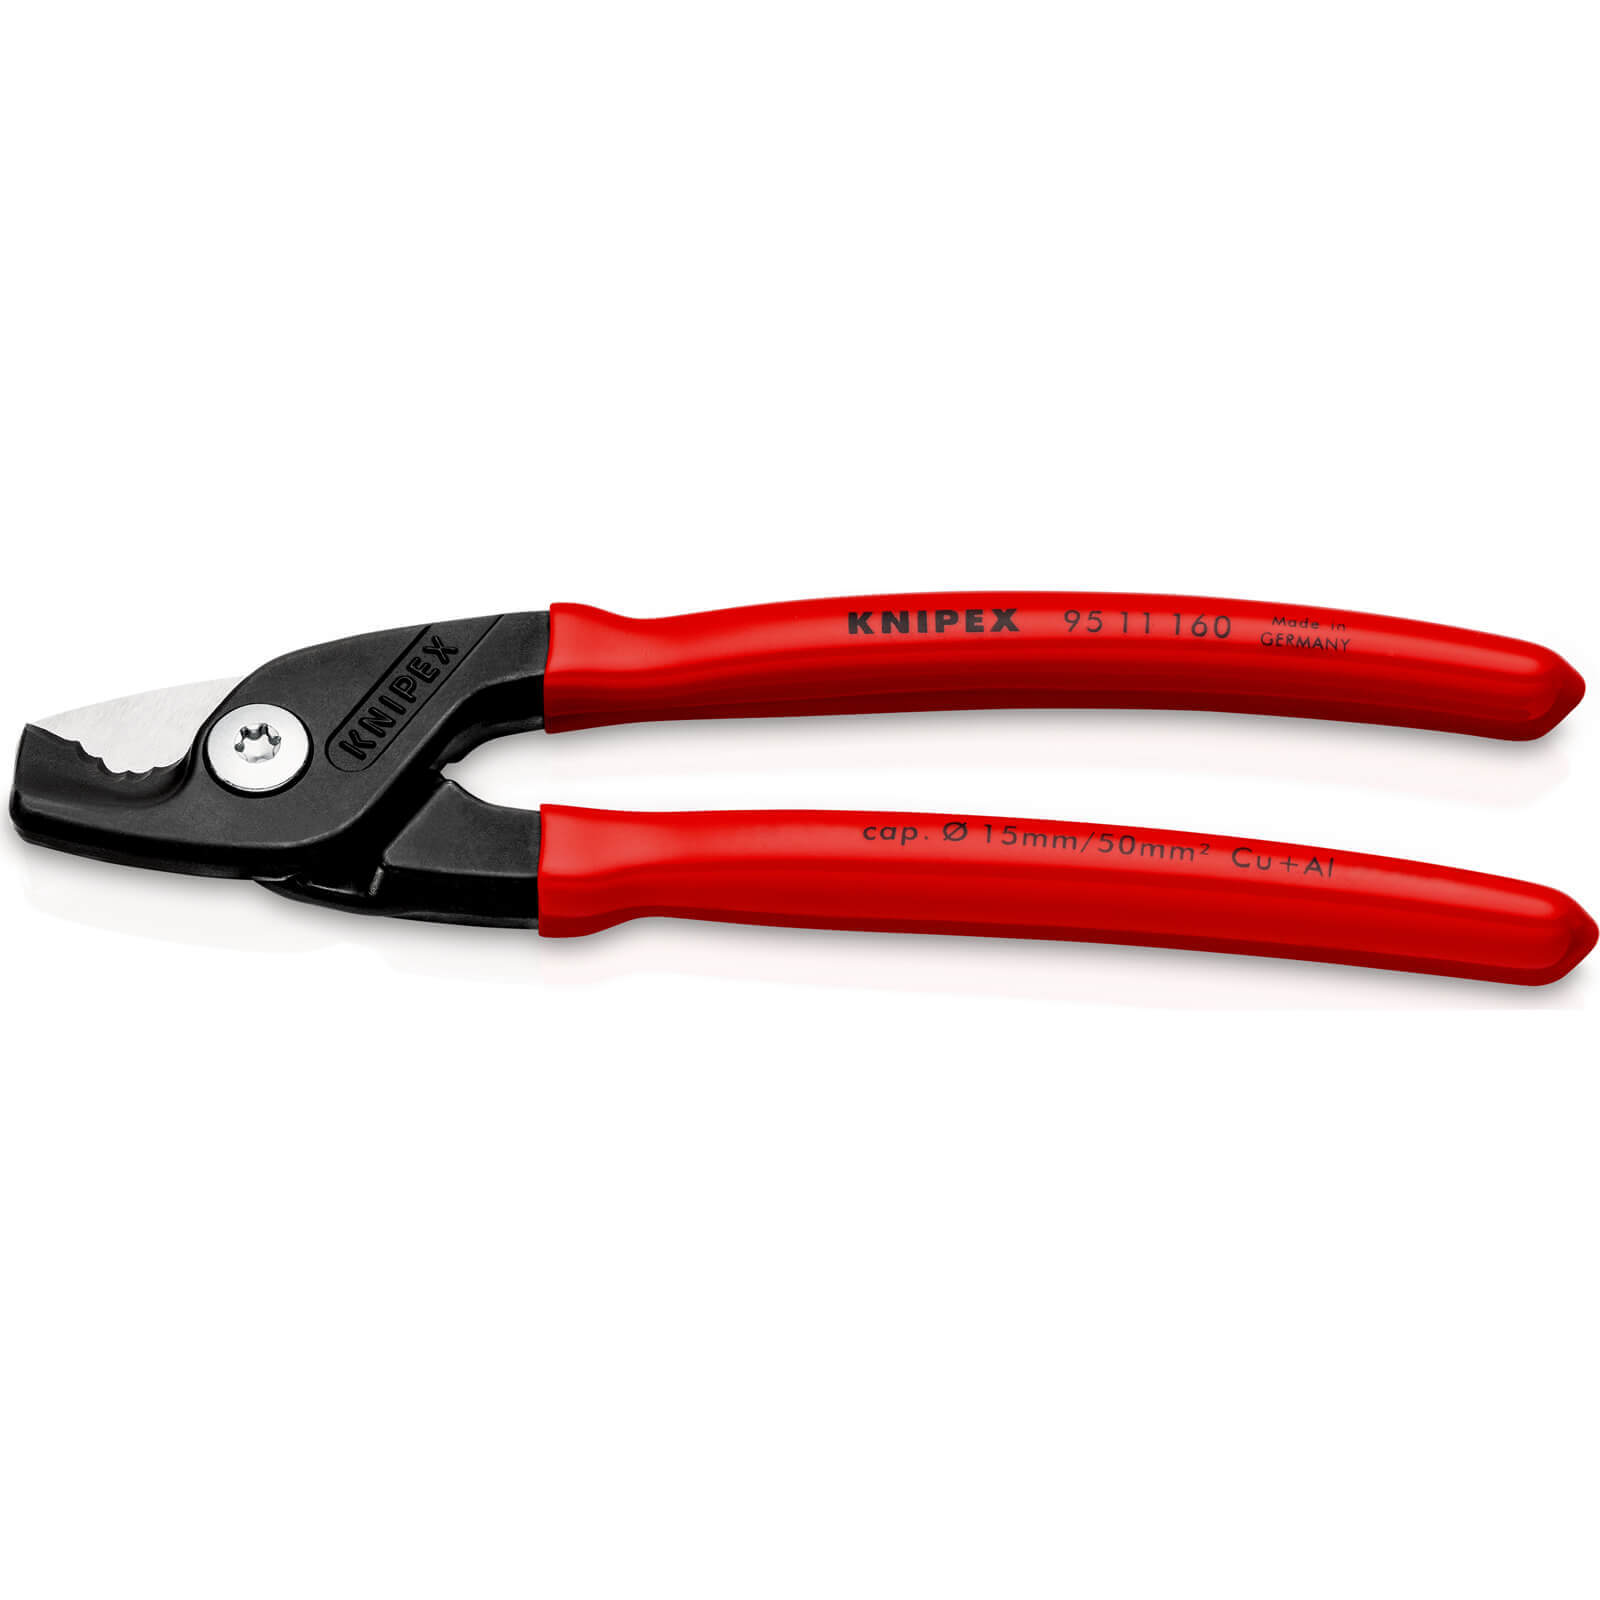 Photo of Knipex 95 11 Stepcut Cable Shears 160mm